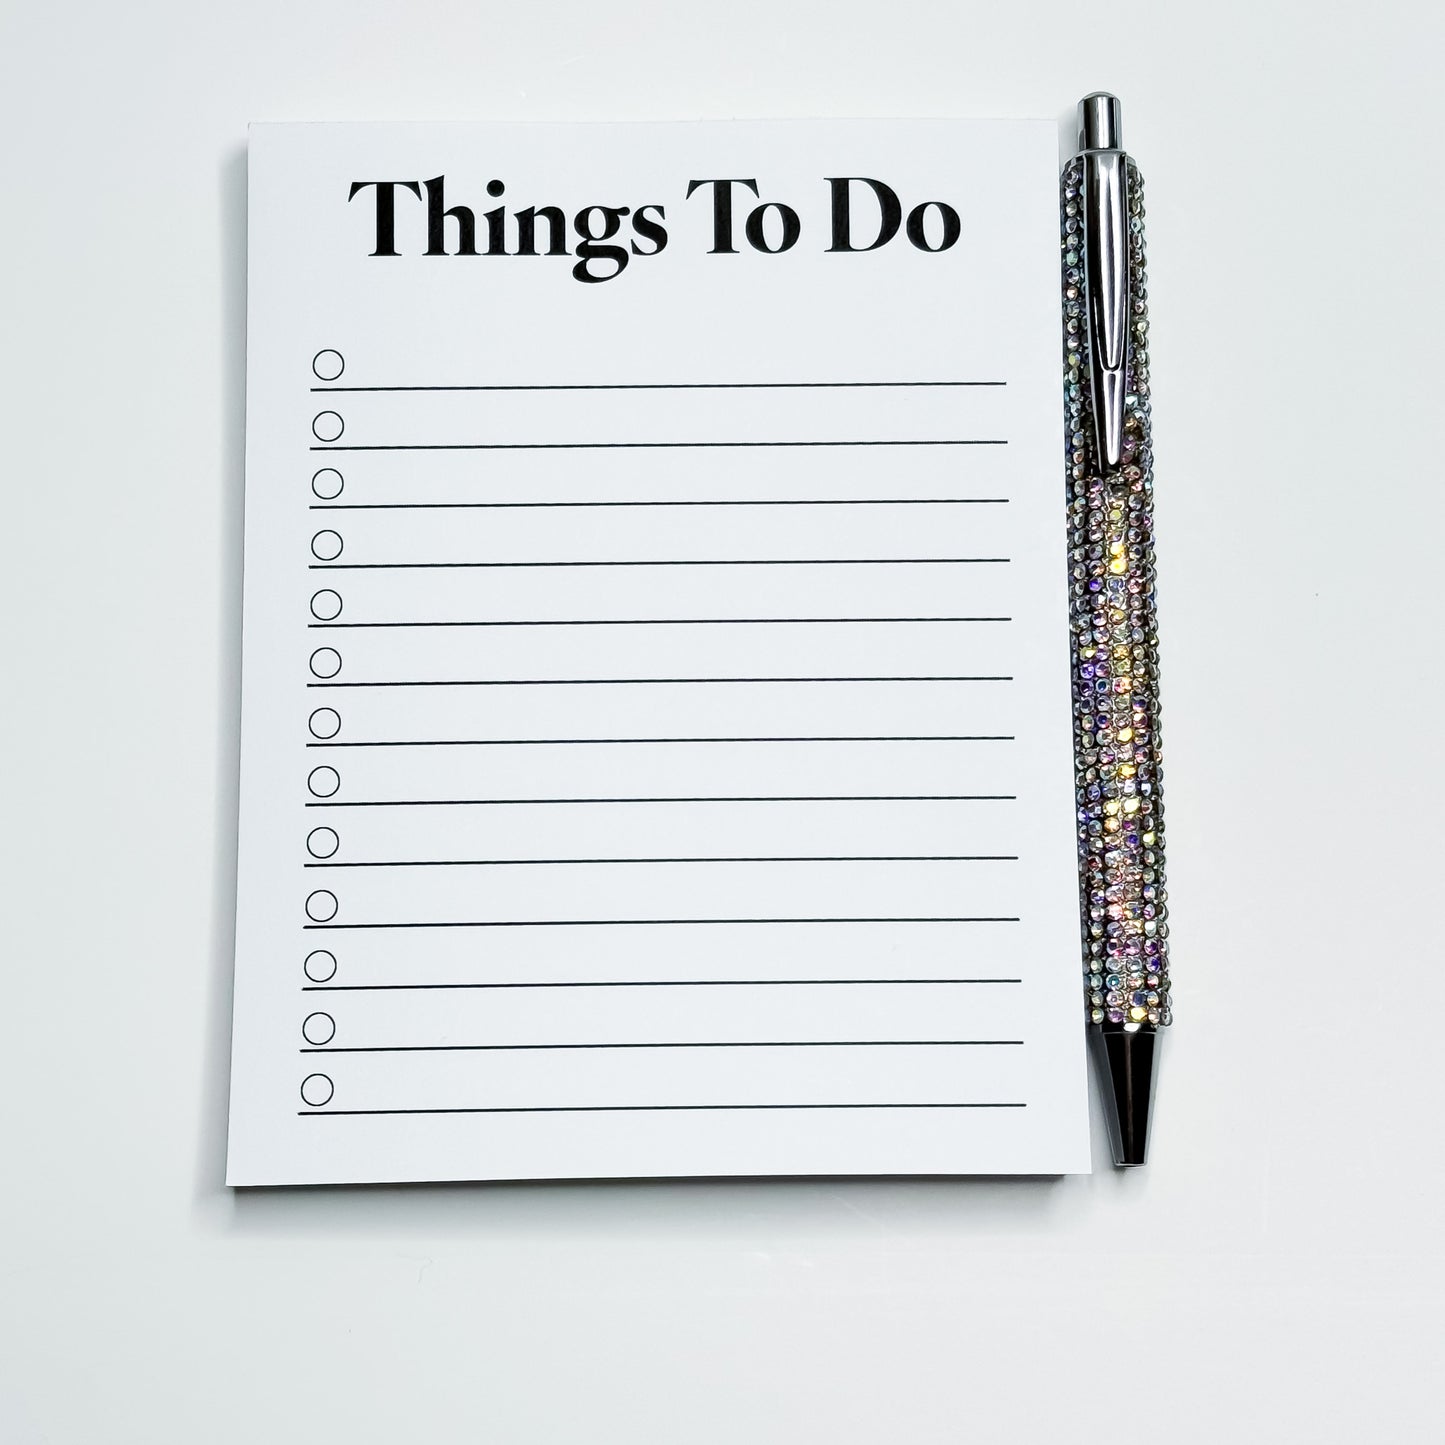 Things To Do - Notepad with Pen